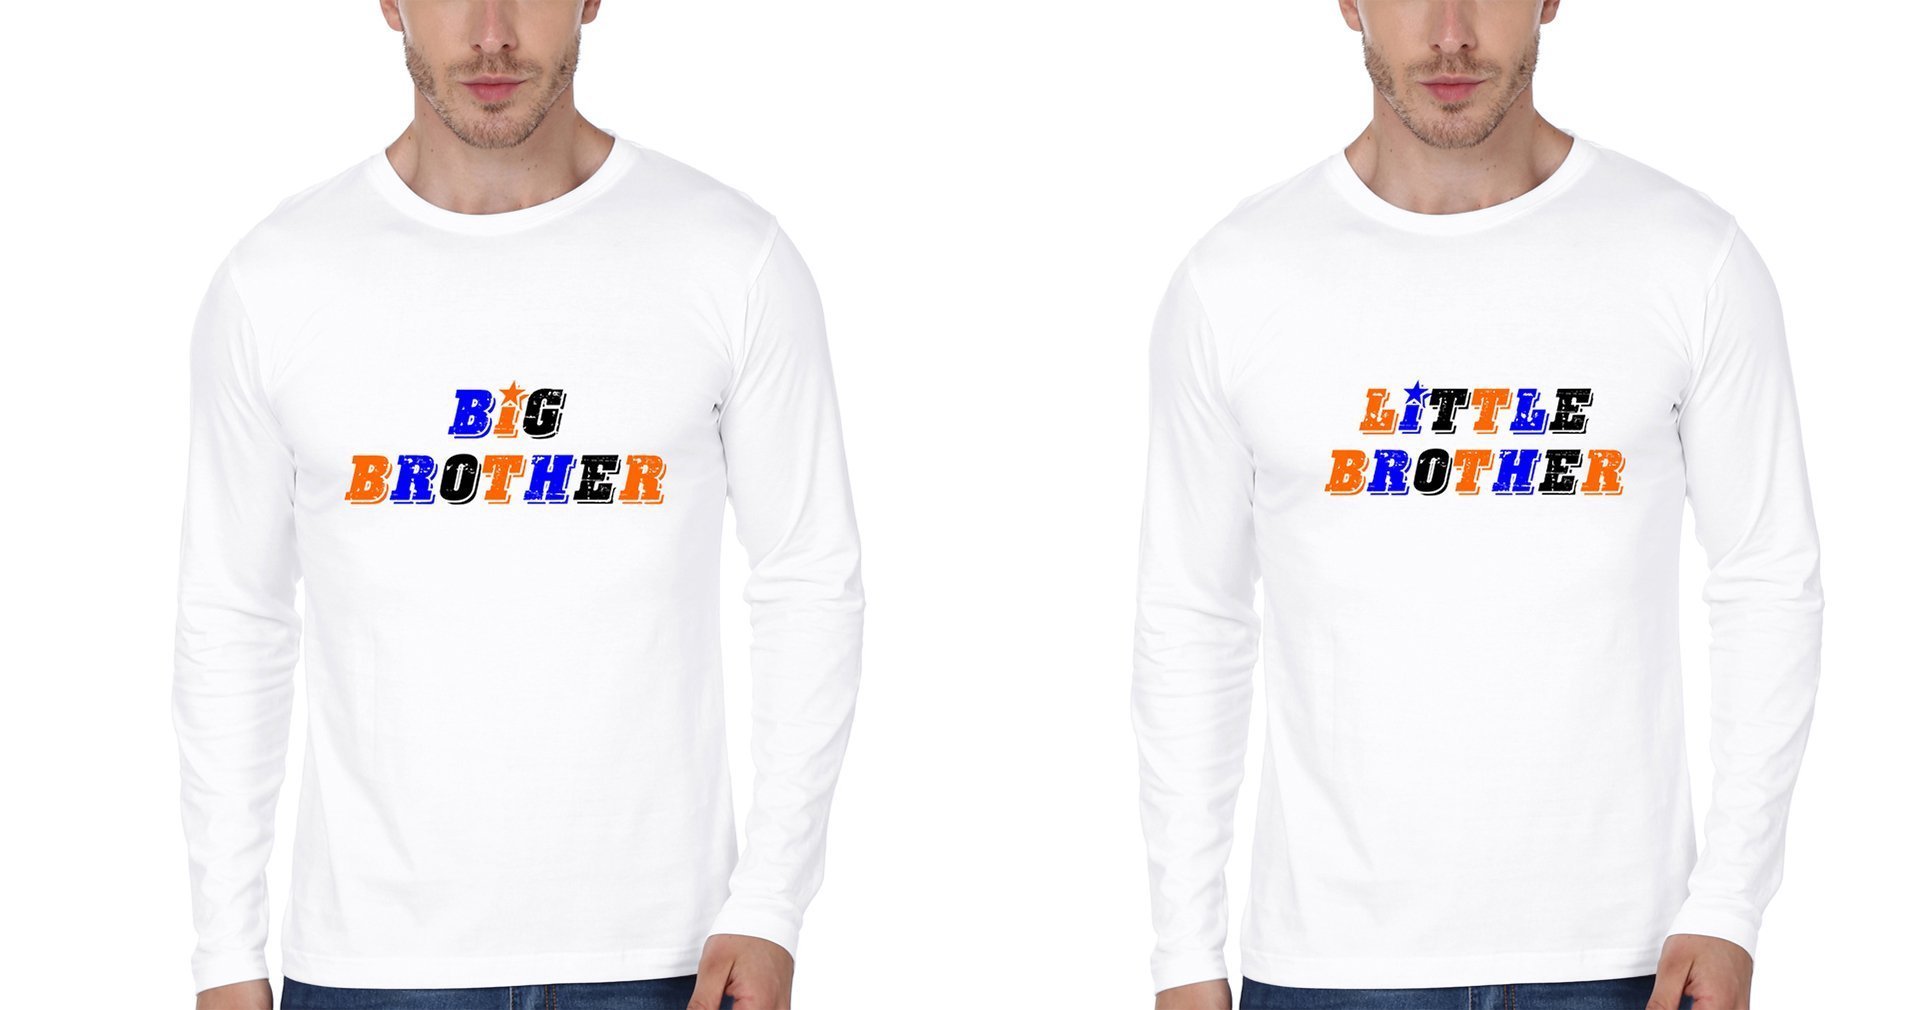 BIG LIL BRO Brother-Brother Full Sleeves T-Shirts -FunkyTees - Funky Tees Club